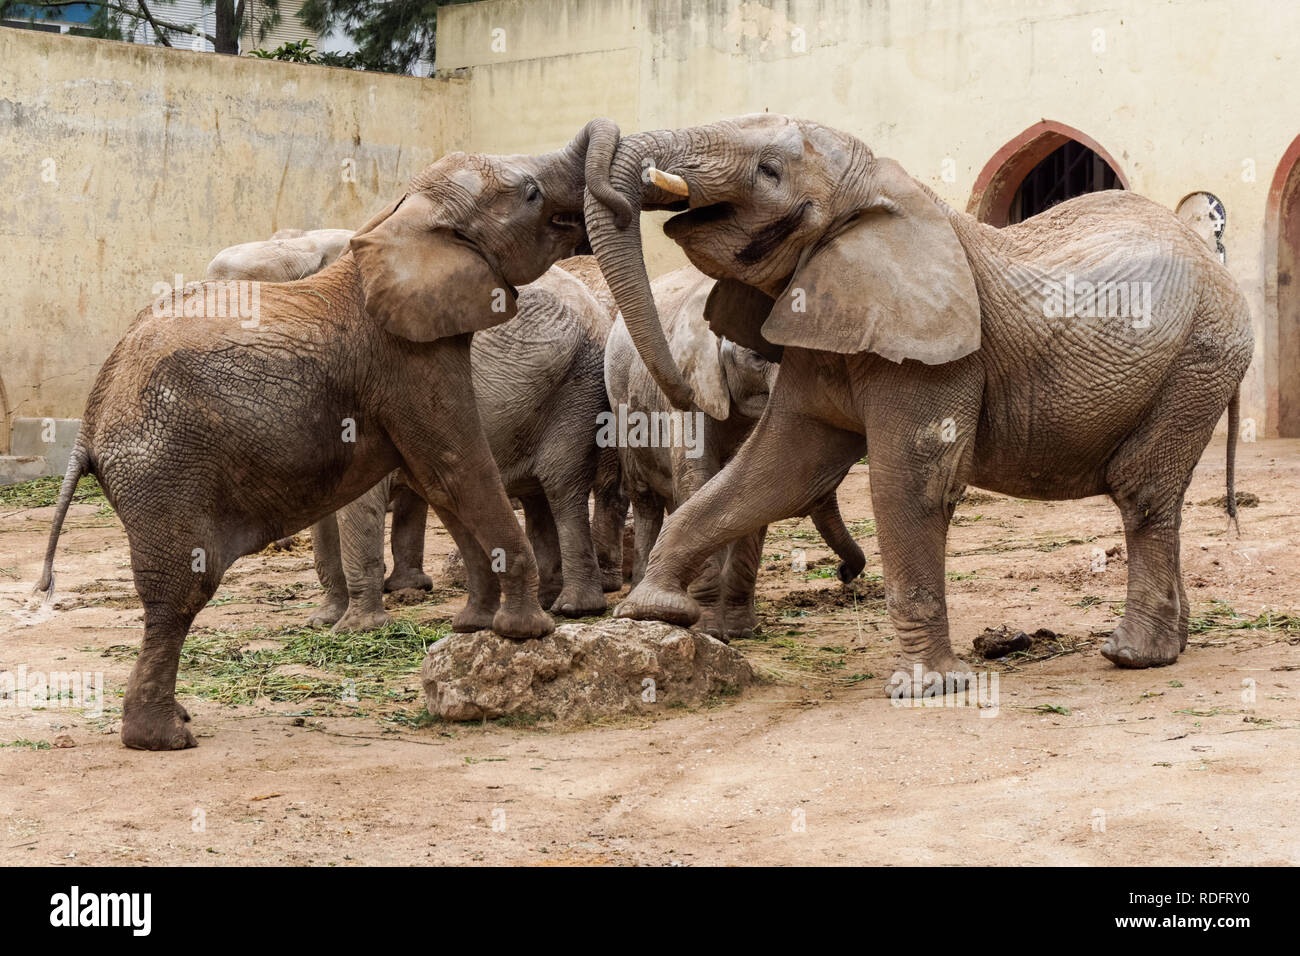 African elephants at Lisbon Zoo, Portugal Stock Photo